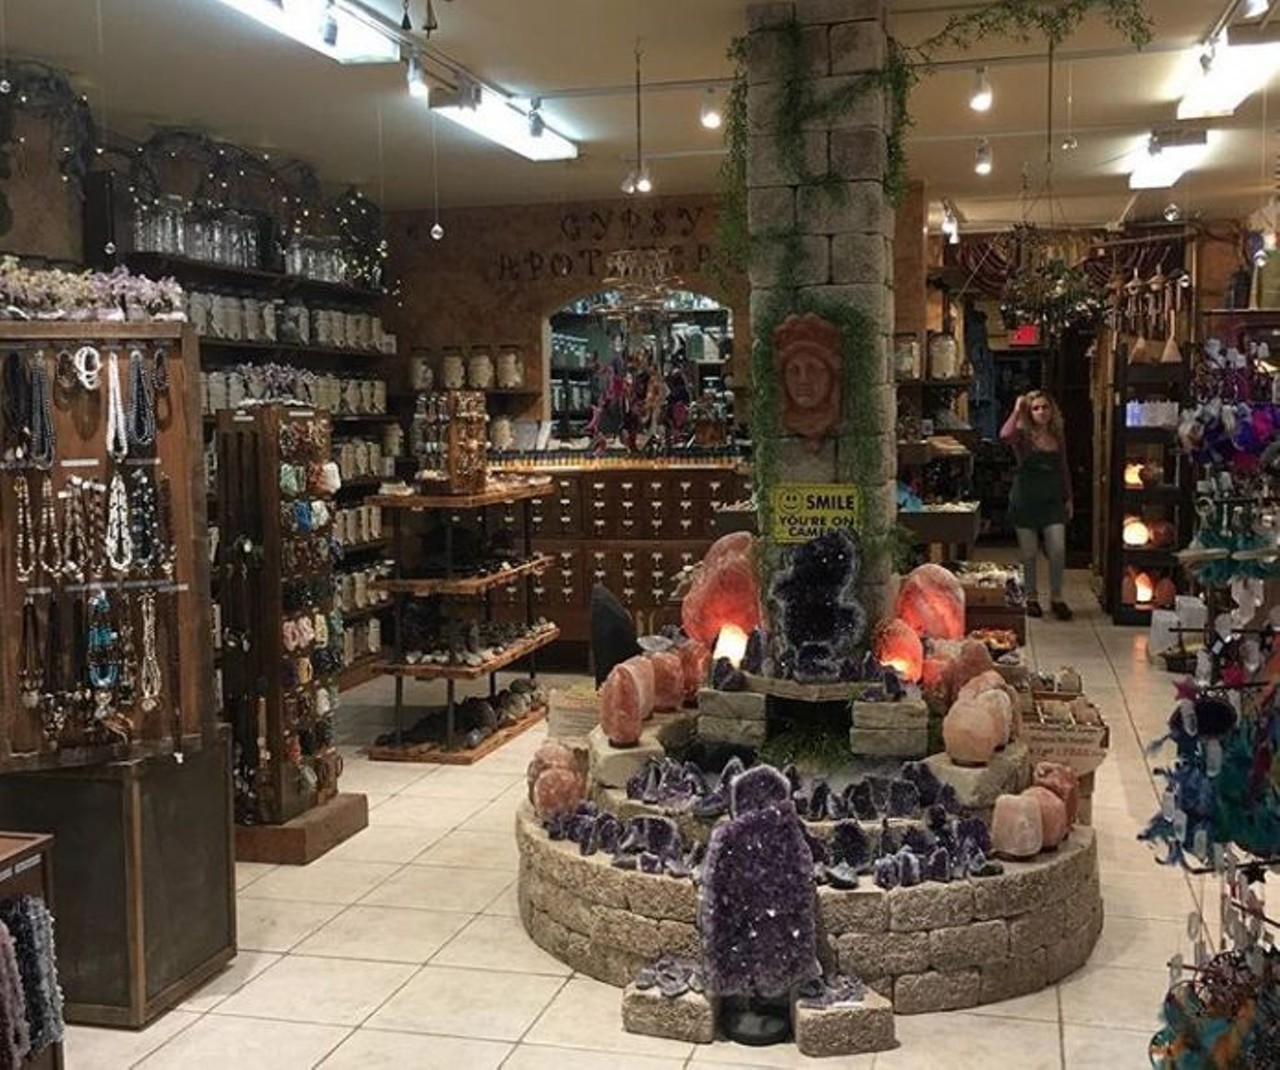 Gypsy Apothecary Herb &
Metaphysical Shop  
3540 S. Orange Ave., 407-745-5805
Align your chakras with the stones, Eastern remedies and more found at this holistic retailer.
Photo via xovictoriarae / Instagram